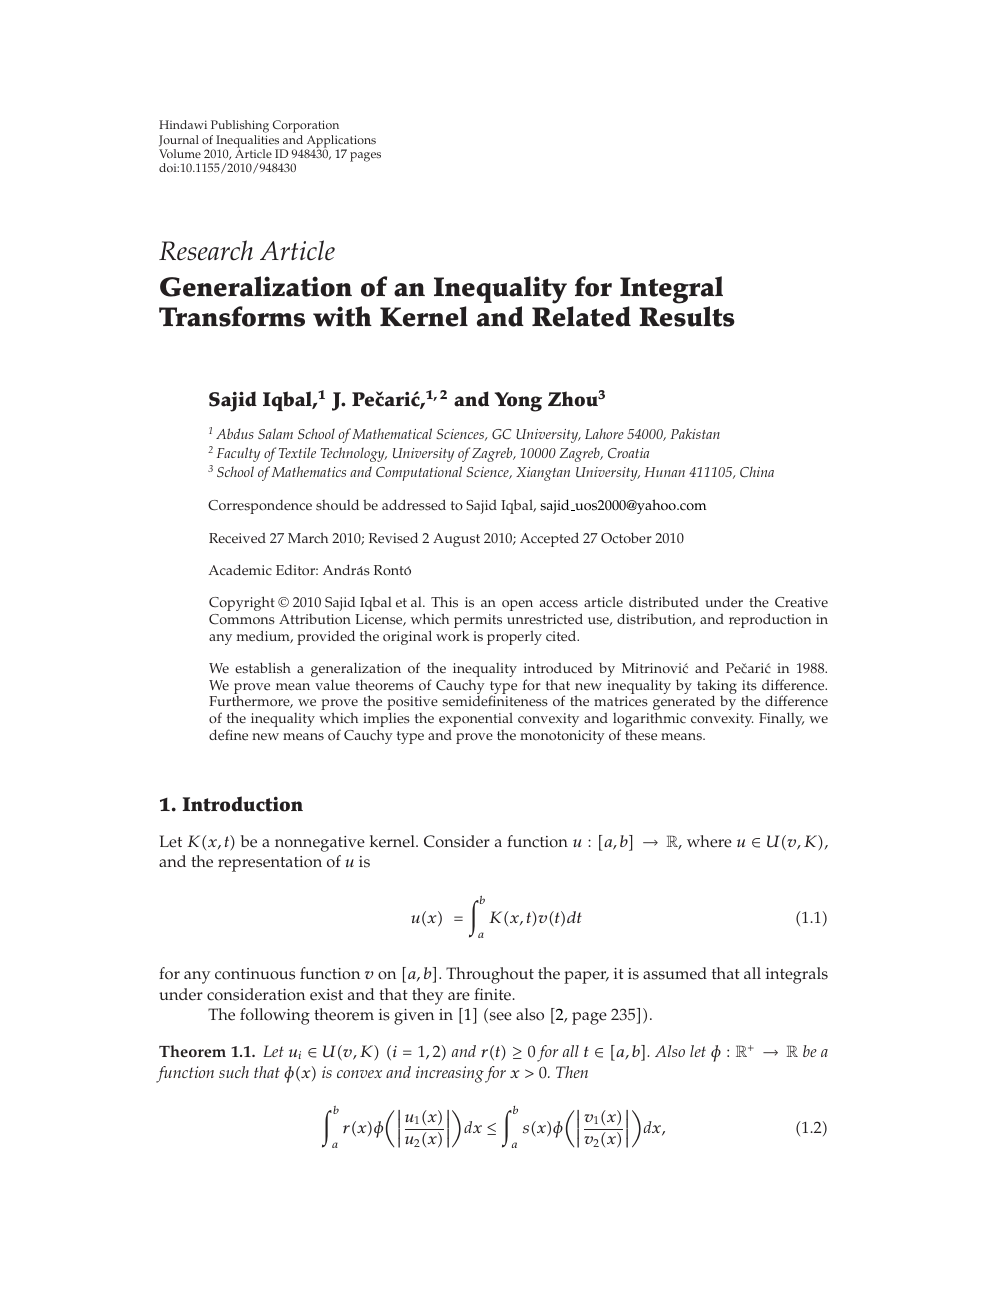 Generalization Of An Inequality For Integral Transforms With Kernel And Related Results Topic Of Research Paper In Mathematics Download Scholarly Article Pdf And Read For Free On Cyberleninka Open Science Hub